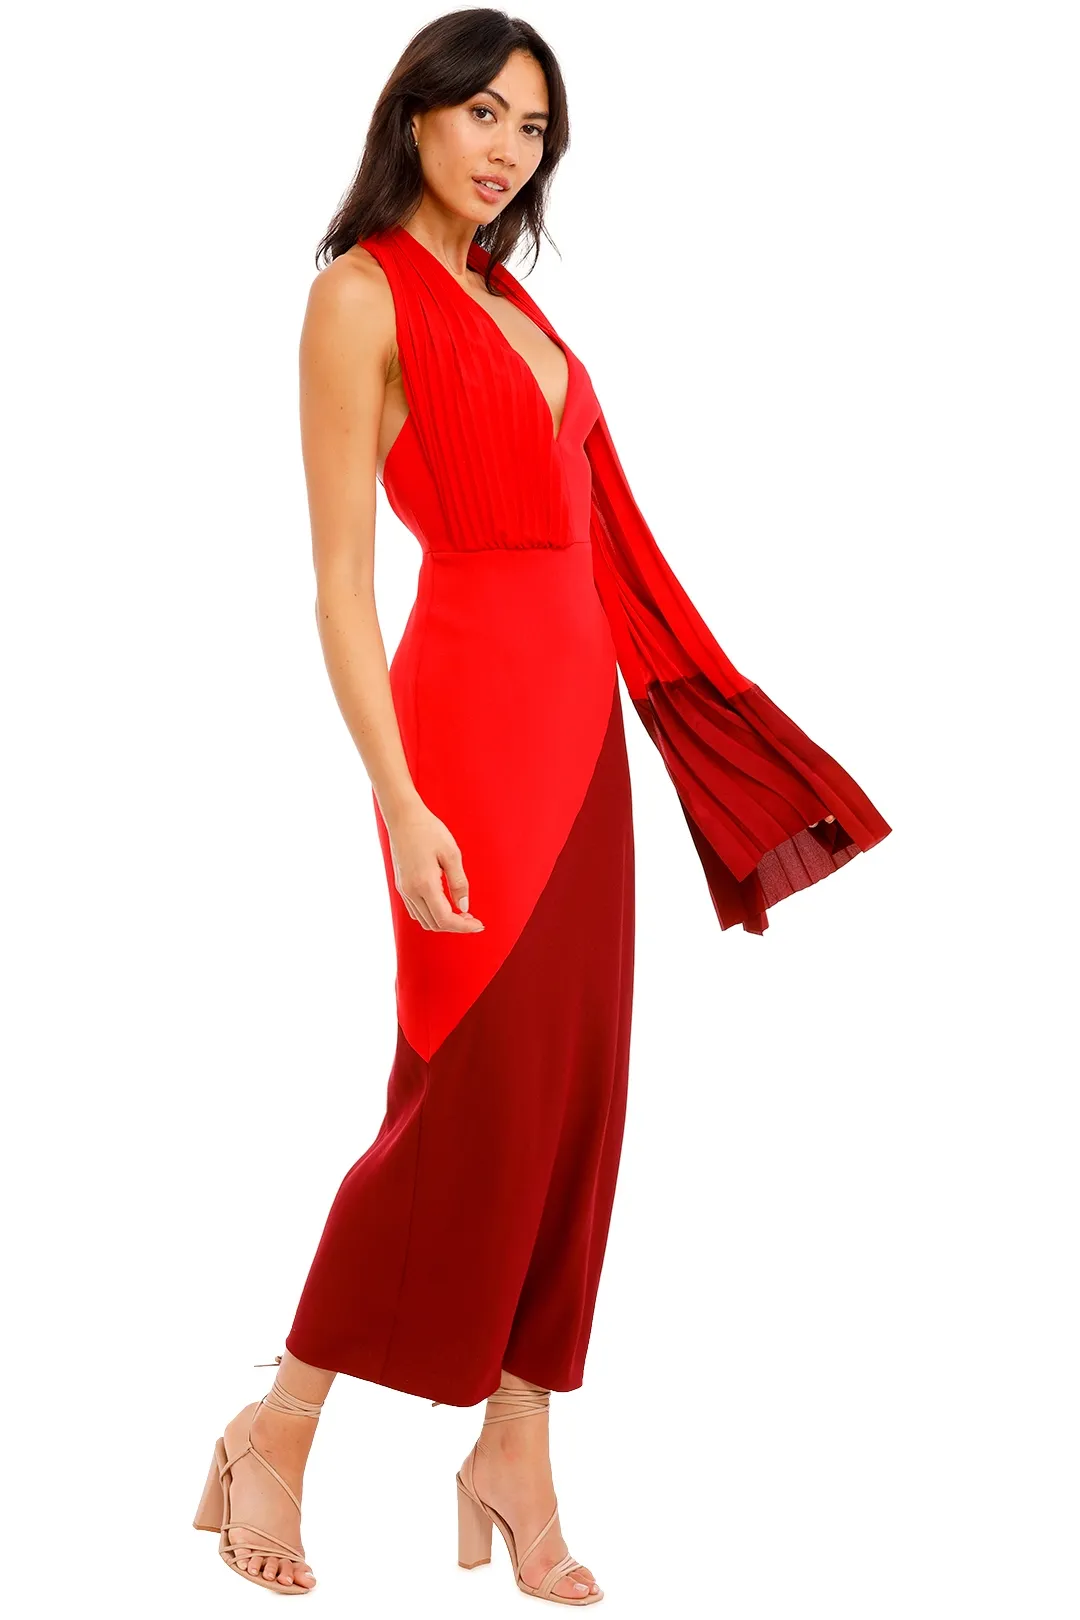 Rent Flora dress in cherry mix for formal events.